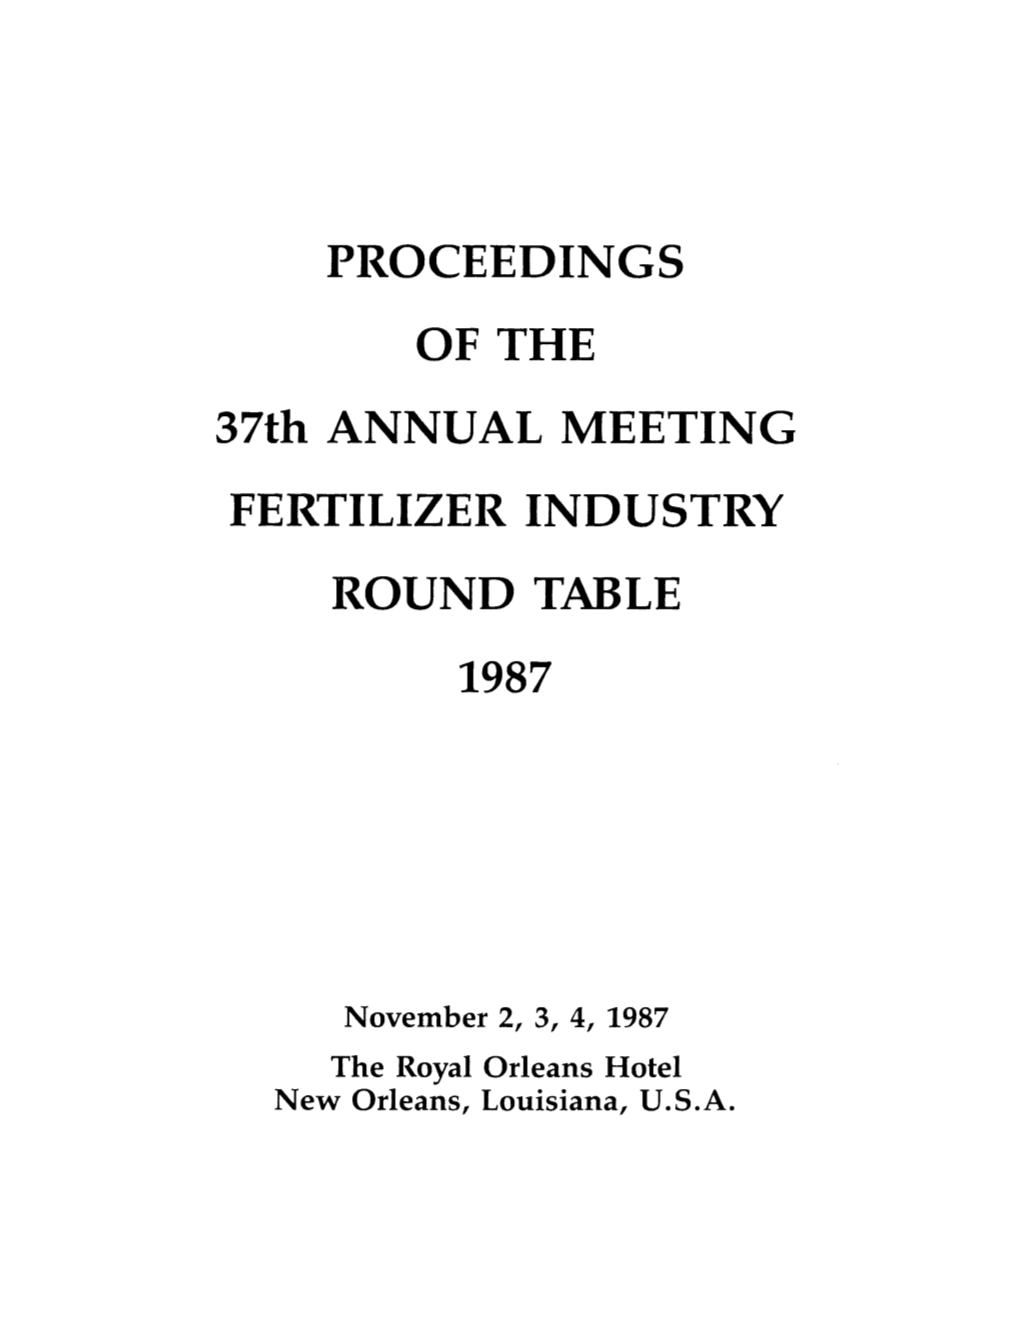 PROCEEDINGS of the 37Th ANNUAL MEETING FERTILIZER INDUSTRY ROUND TABLE 1987